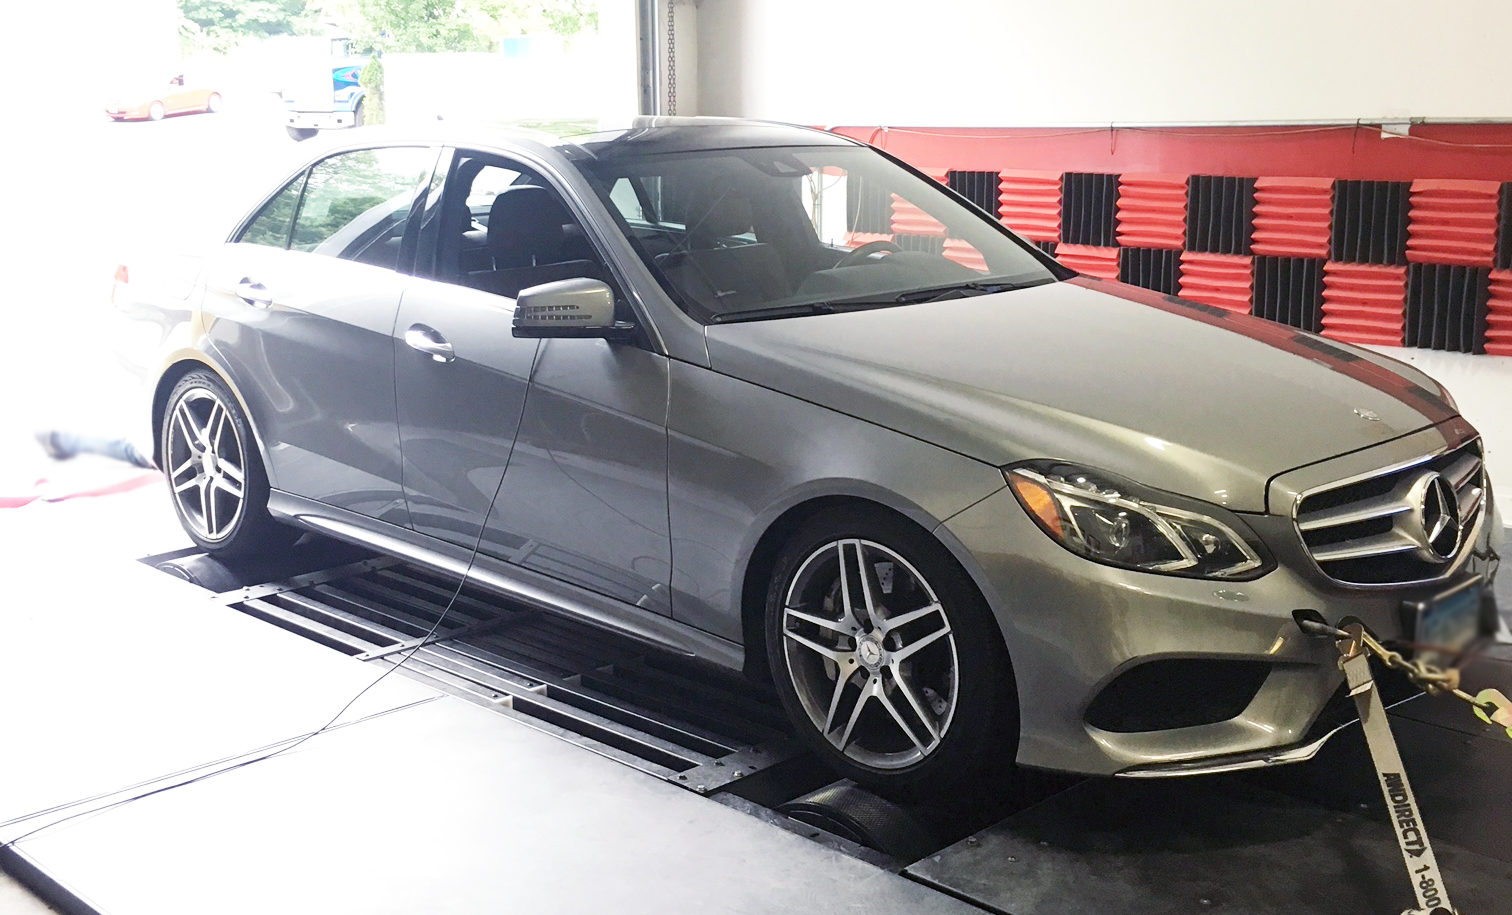 amr performance mercedes benz e550 custom in house dyno tuning mercedes benz e550 custom in house dyno tuning